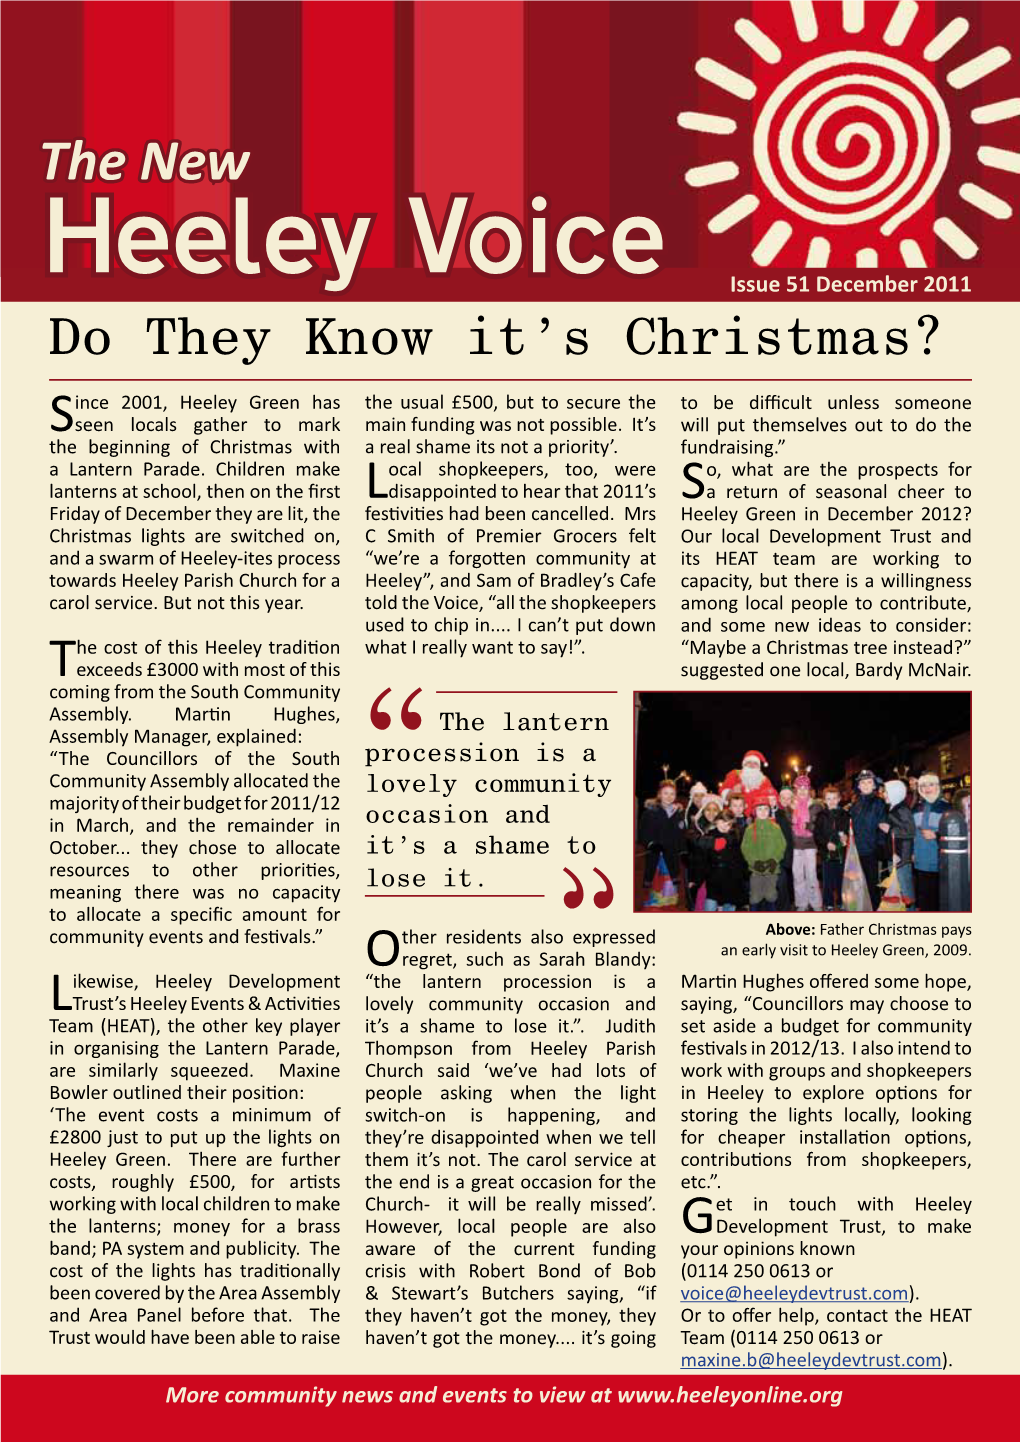 Heeley Voice Issue 51 December 2011 Do They Know It’S Christmas?